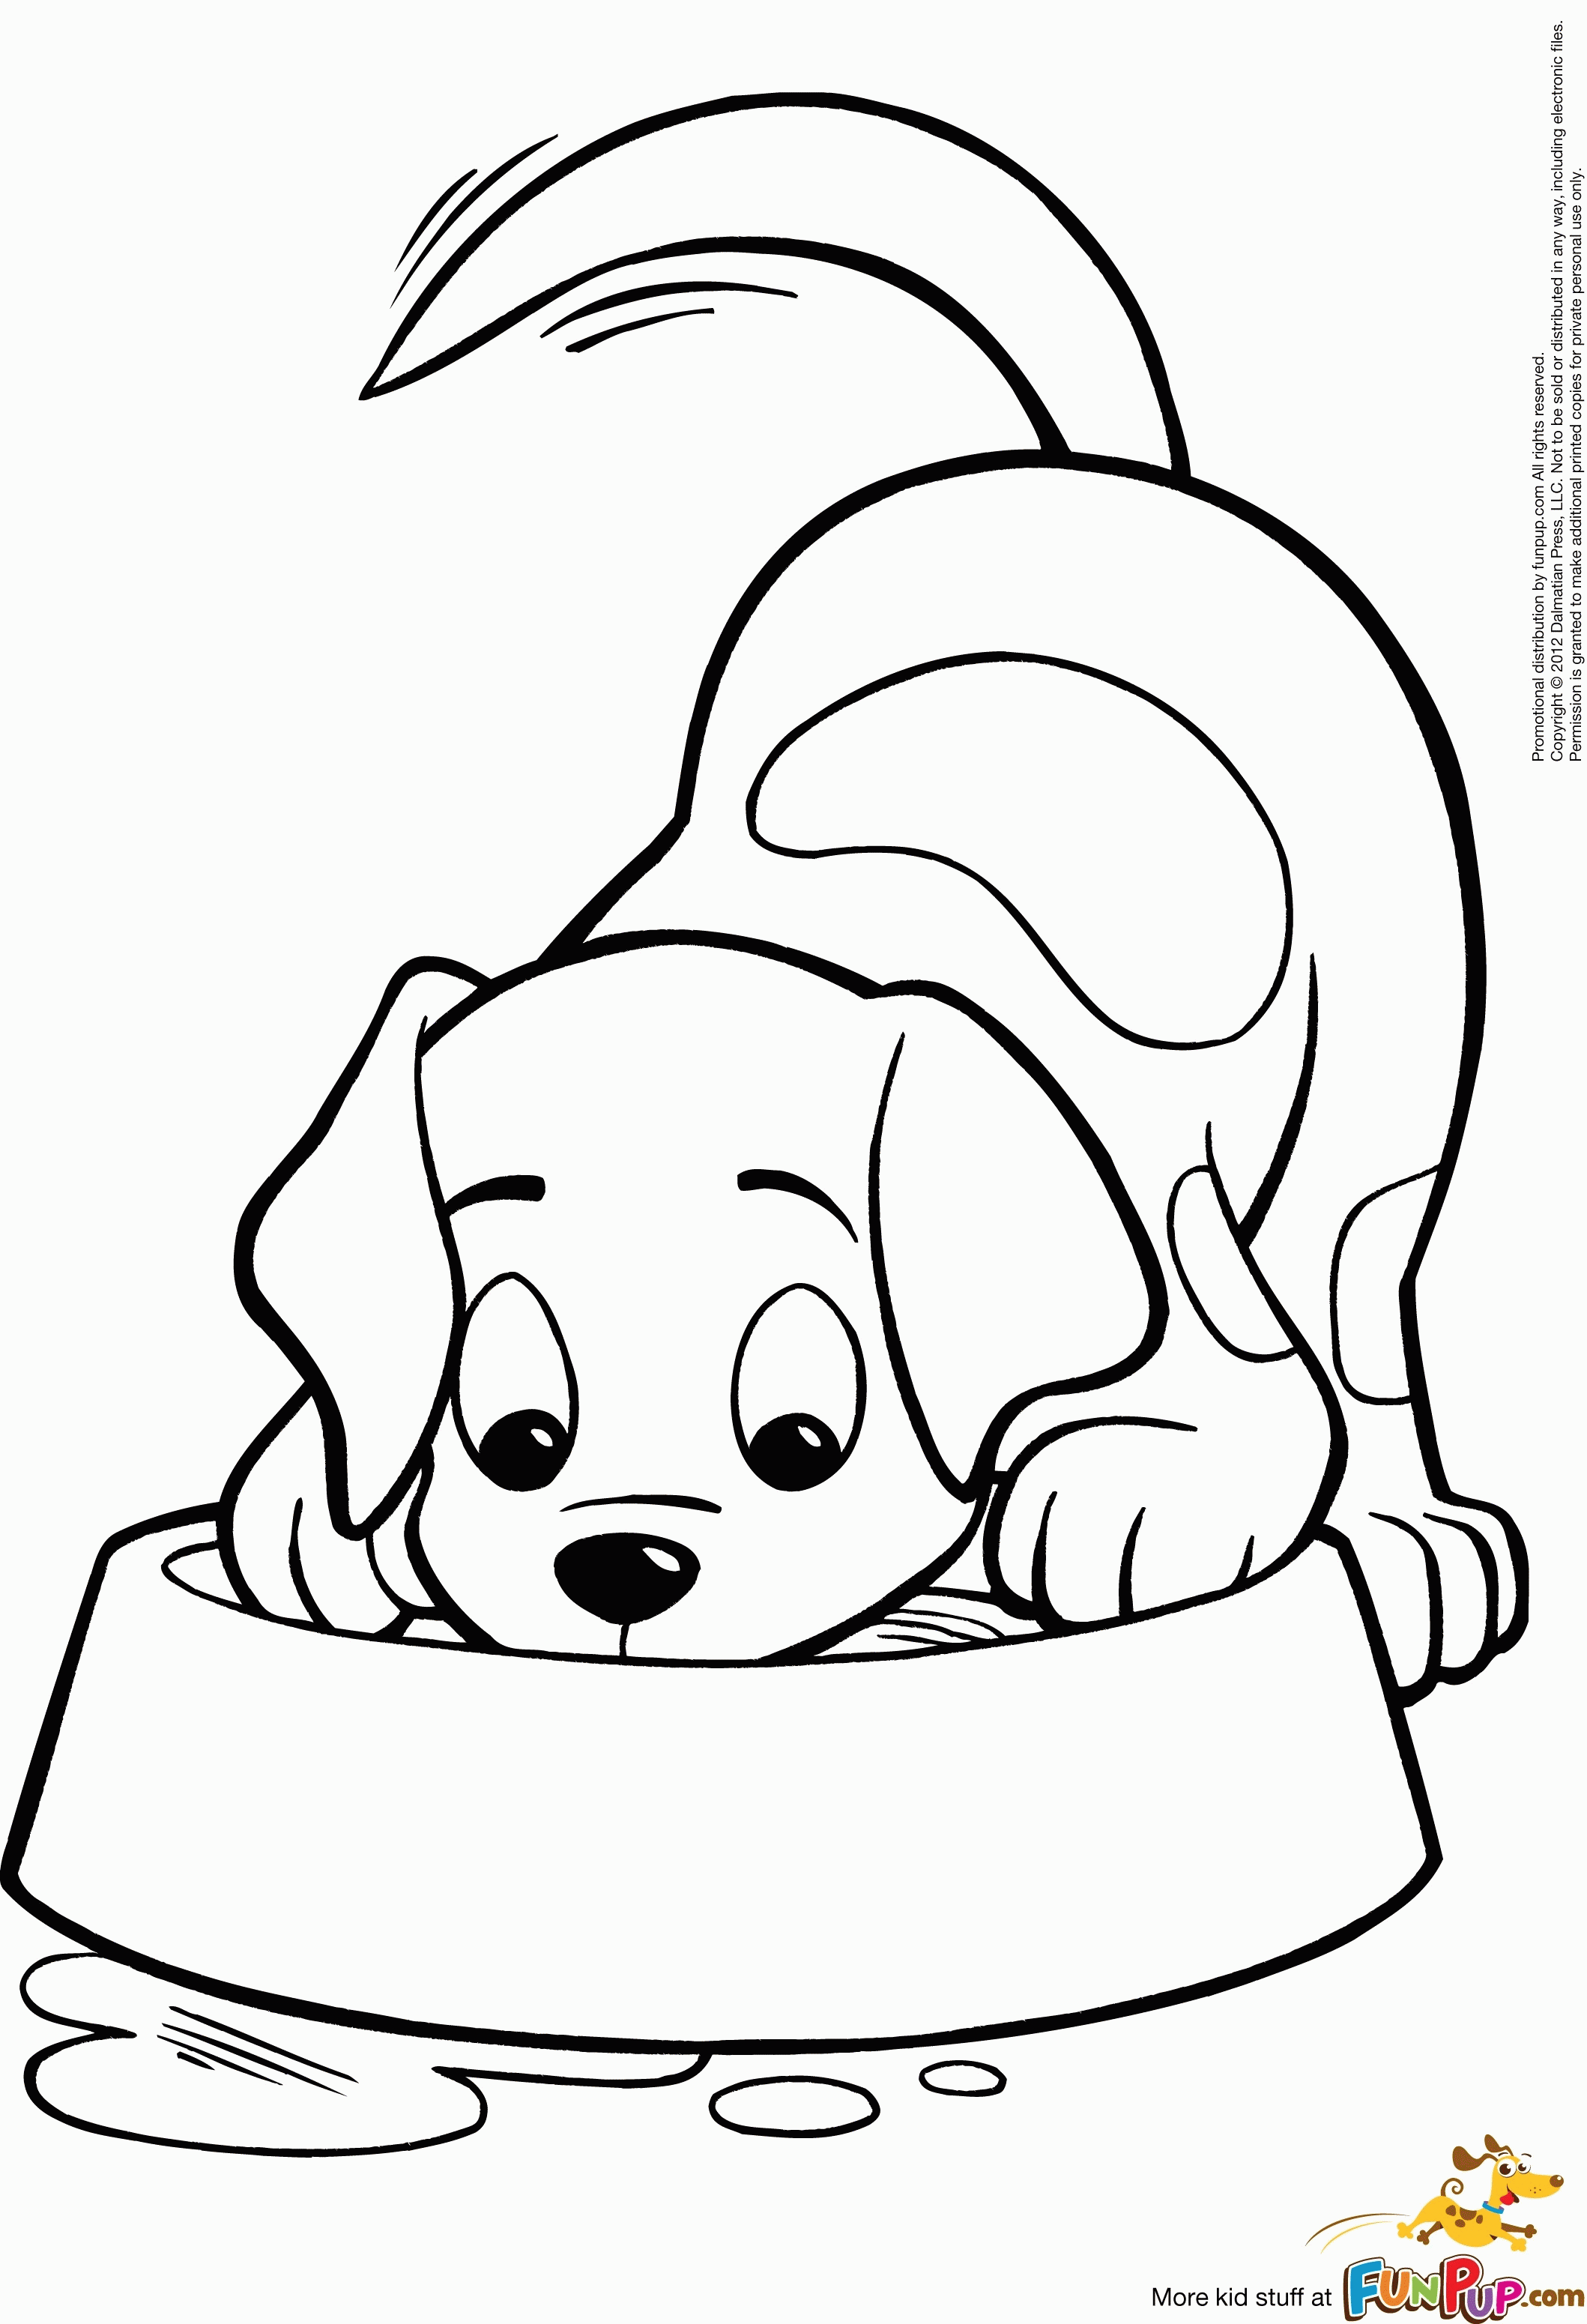 Puppy Colouring Pages Online Puppy Coloring Page Puppy Coloring ...